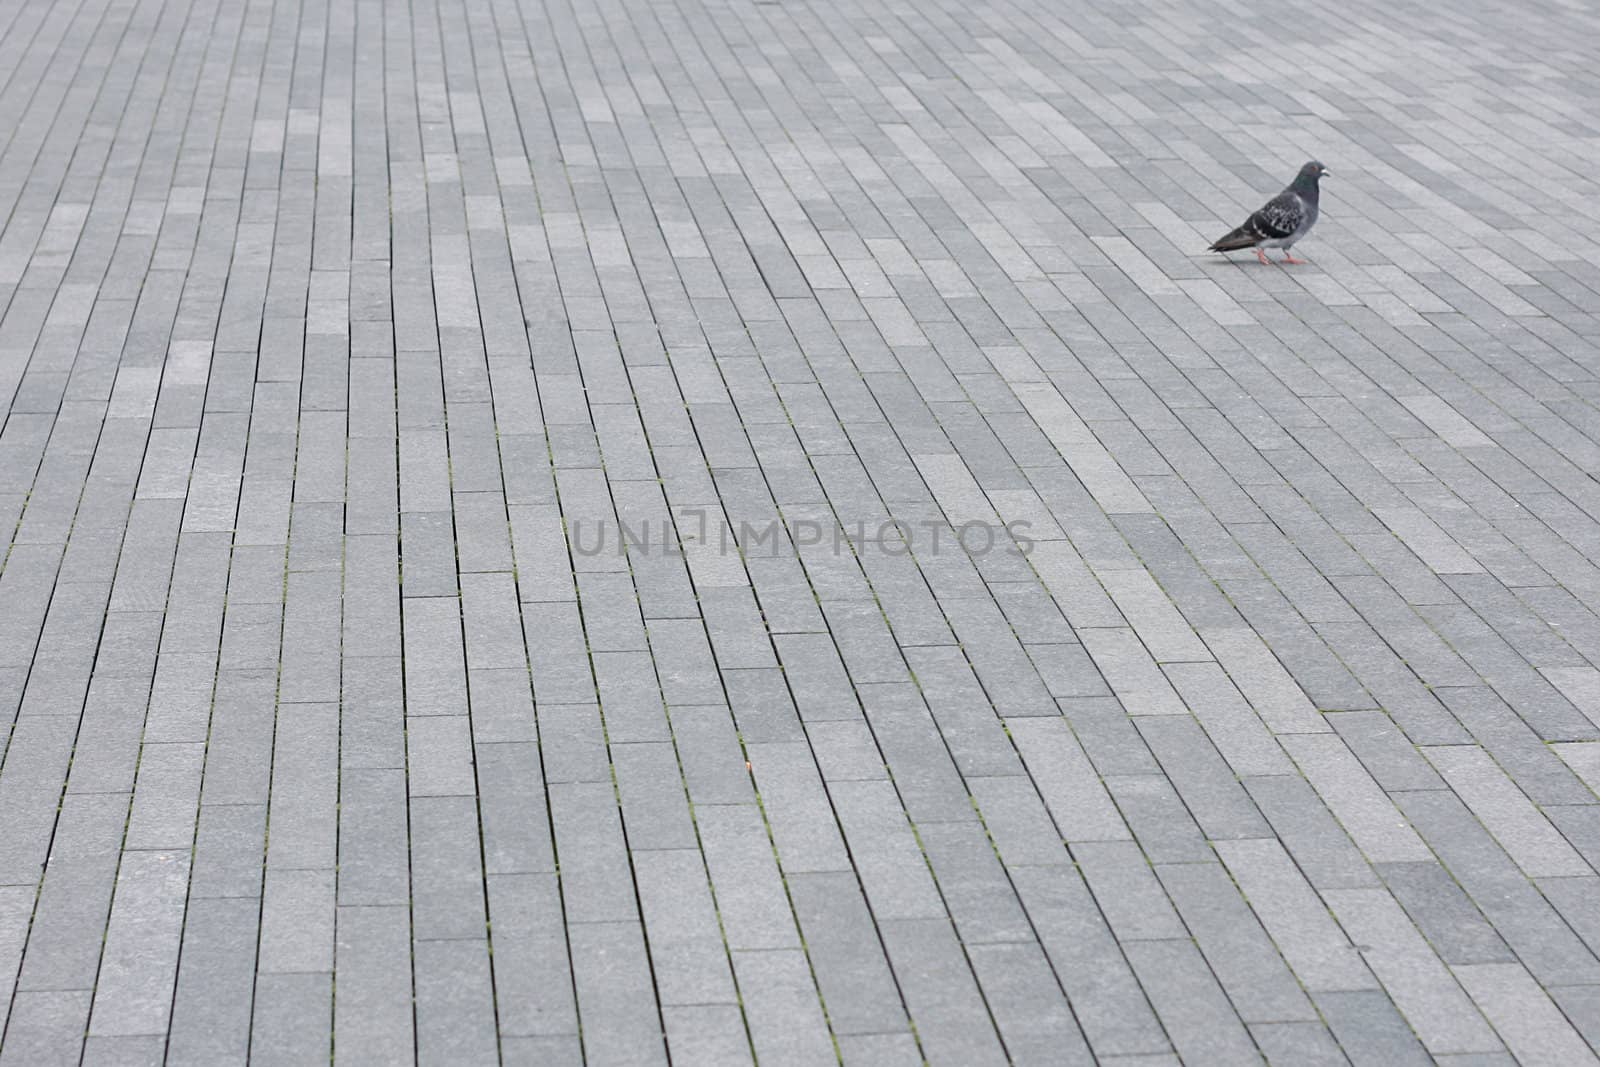 A pigeon on the pavement in London